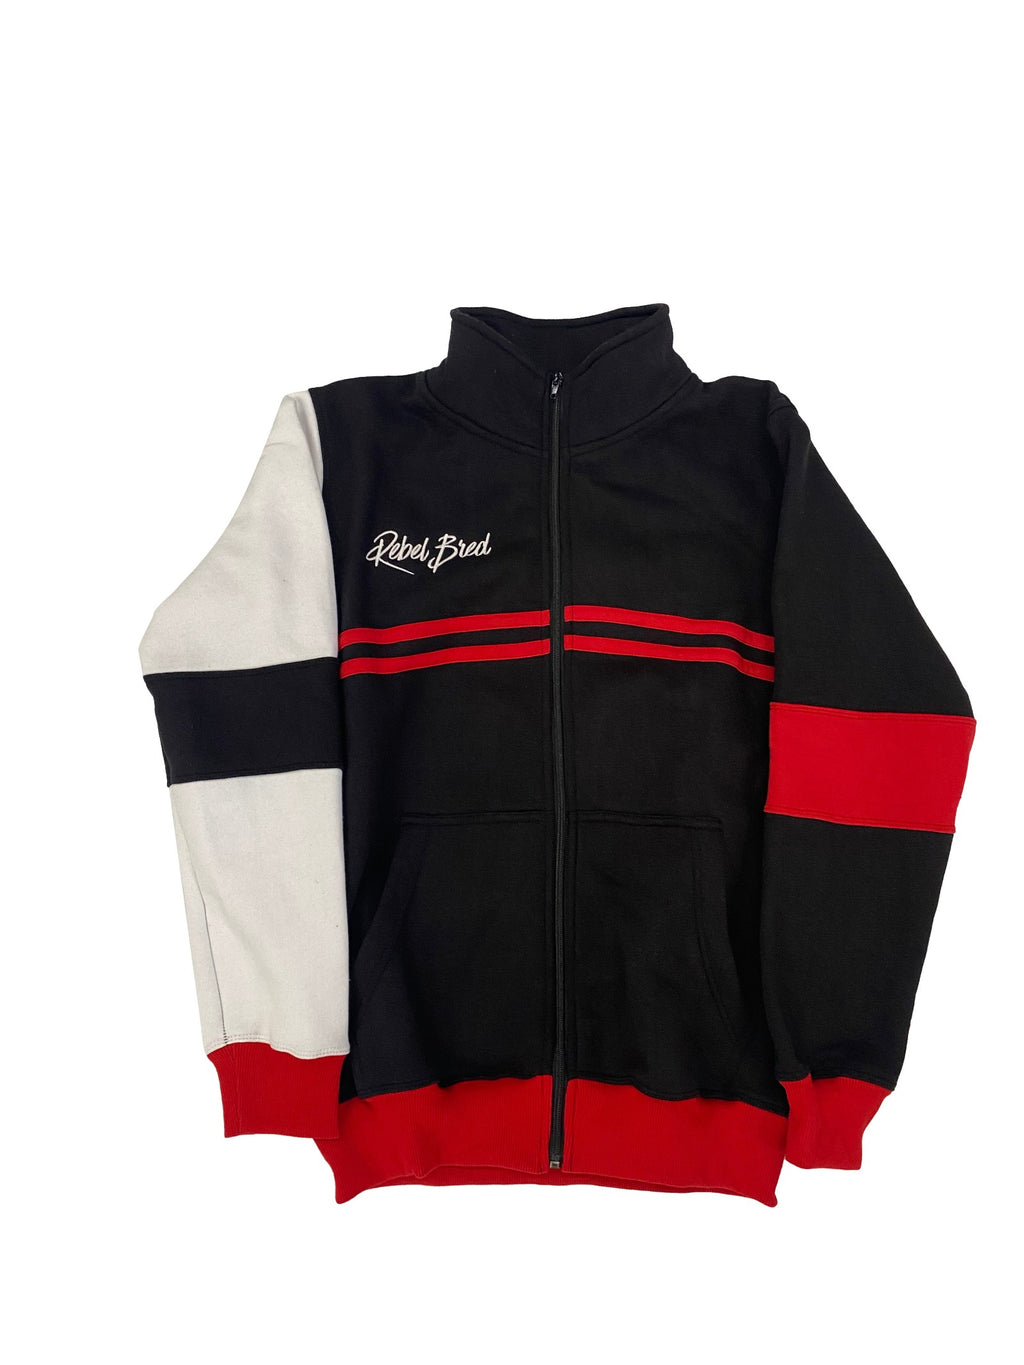 Athletic track jacket with embroidered logo on back